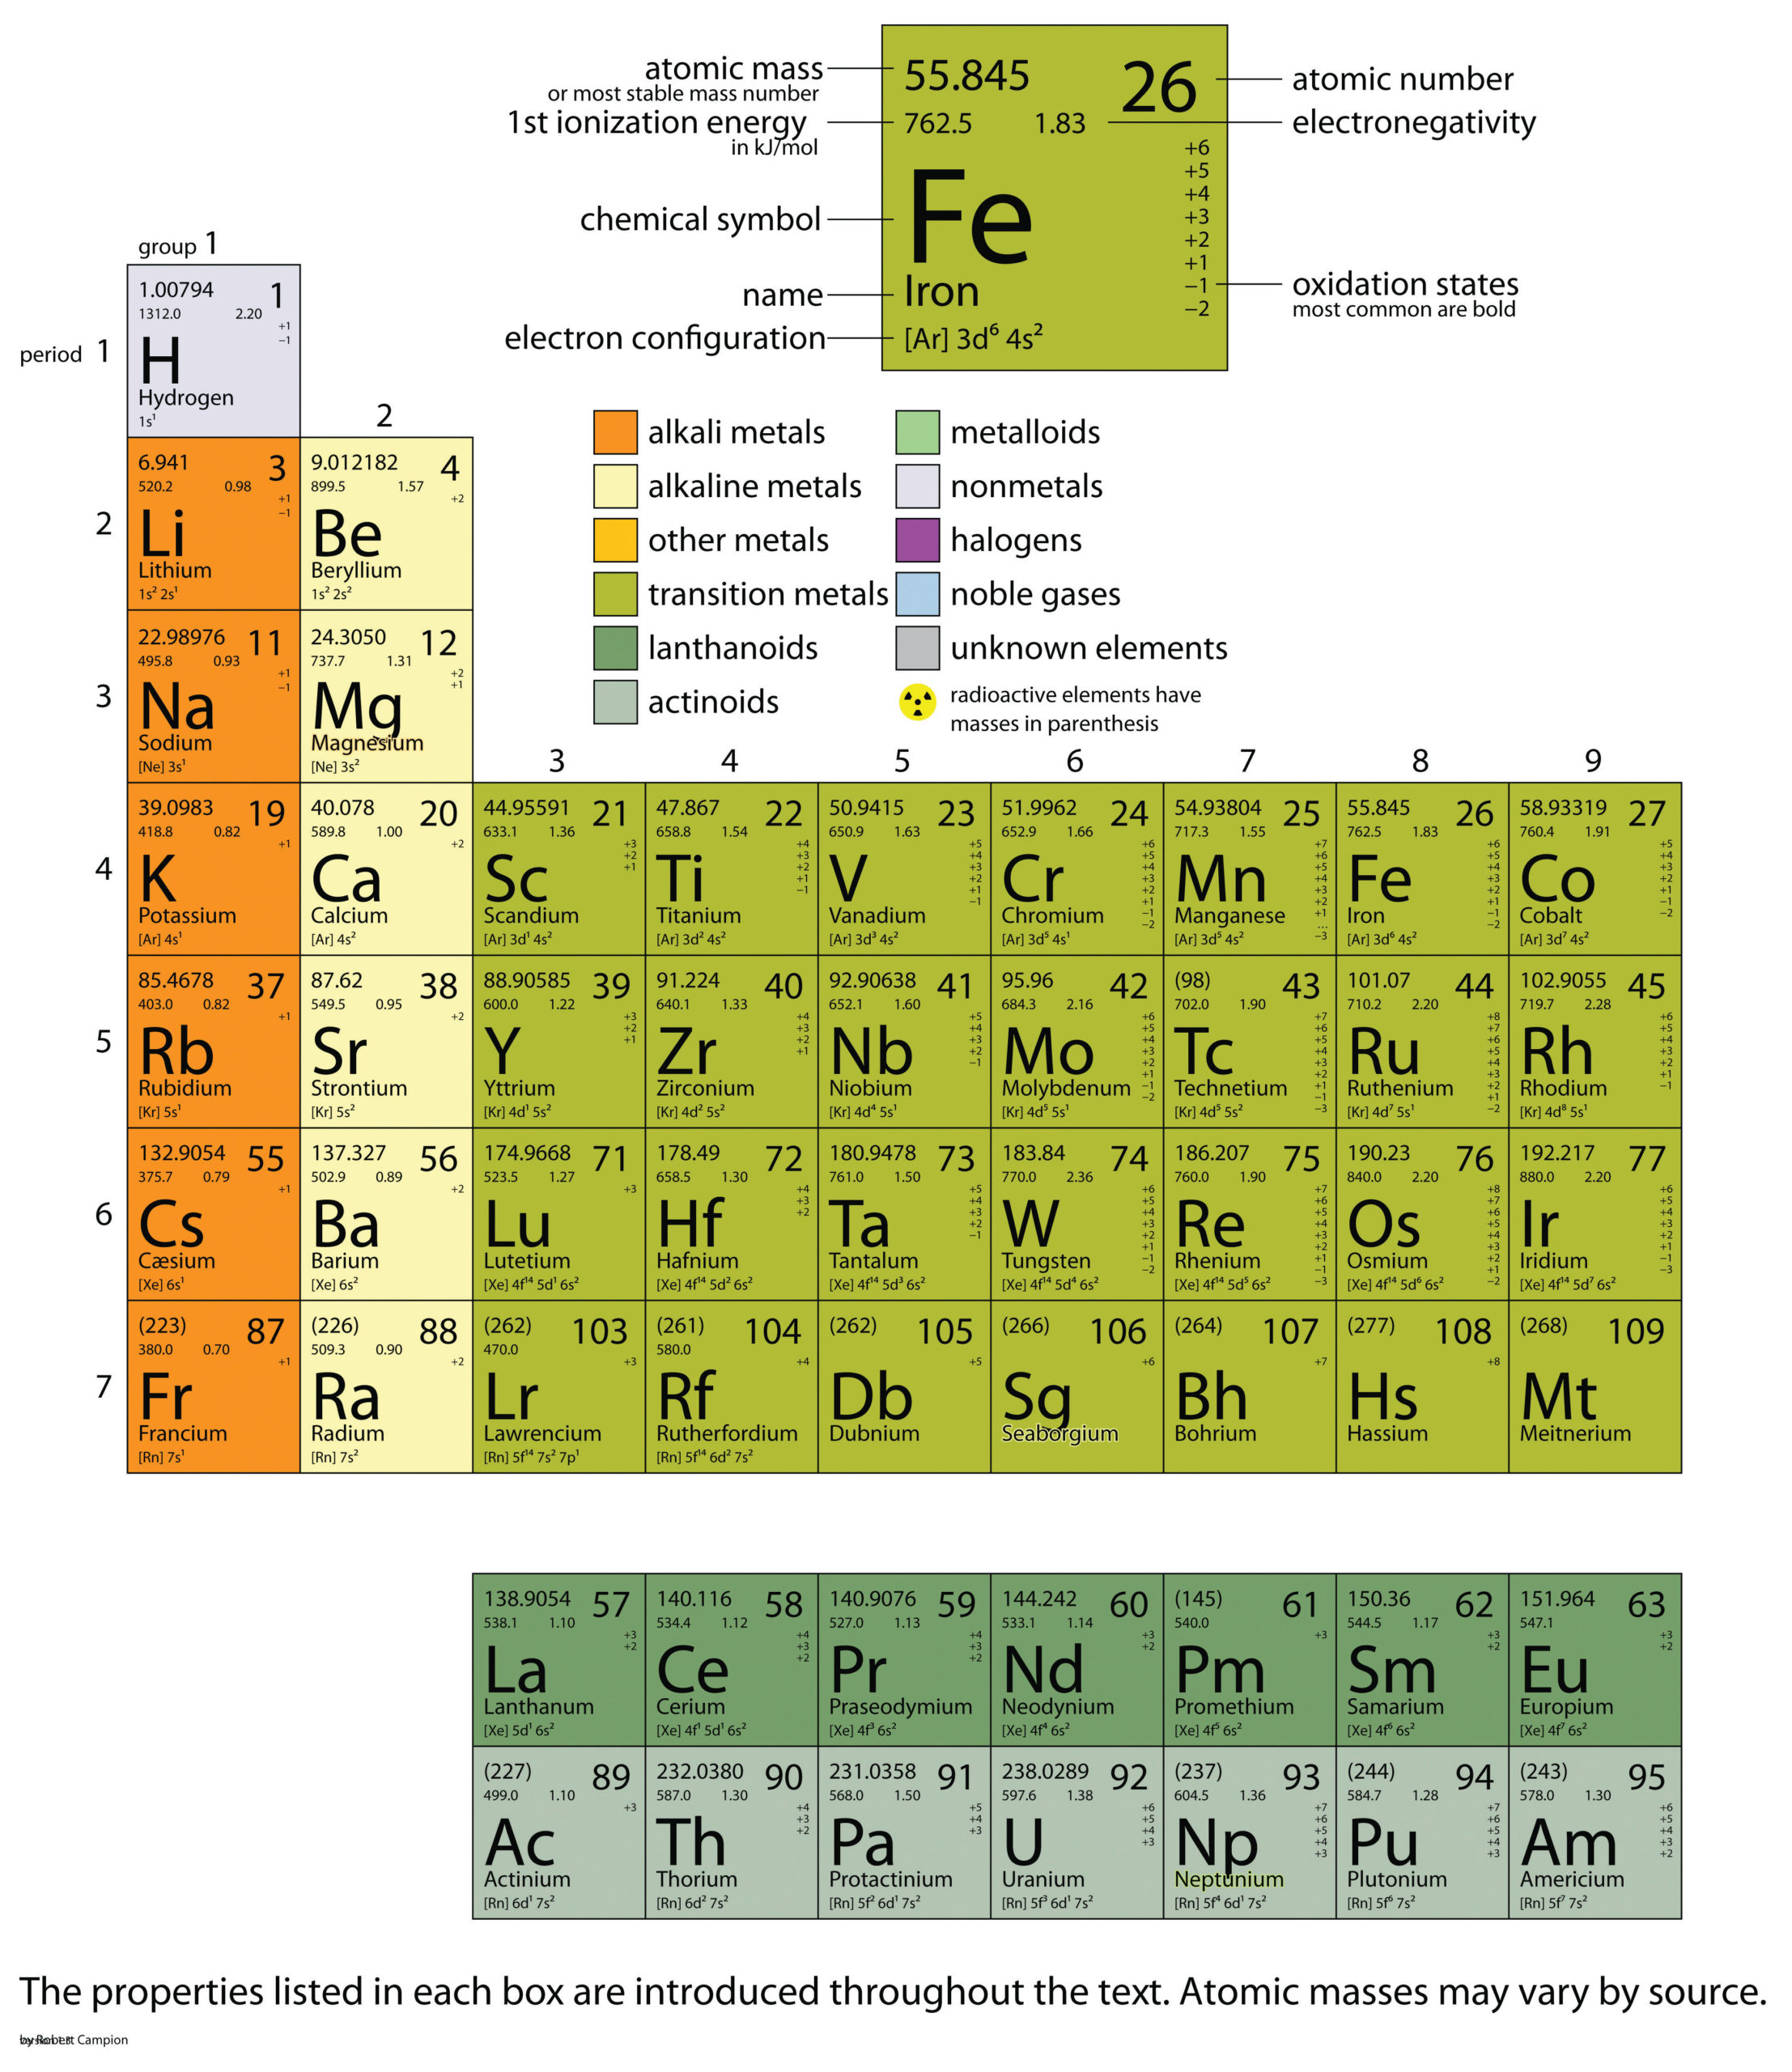 First half of the periodic table of elements.